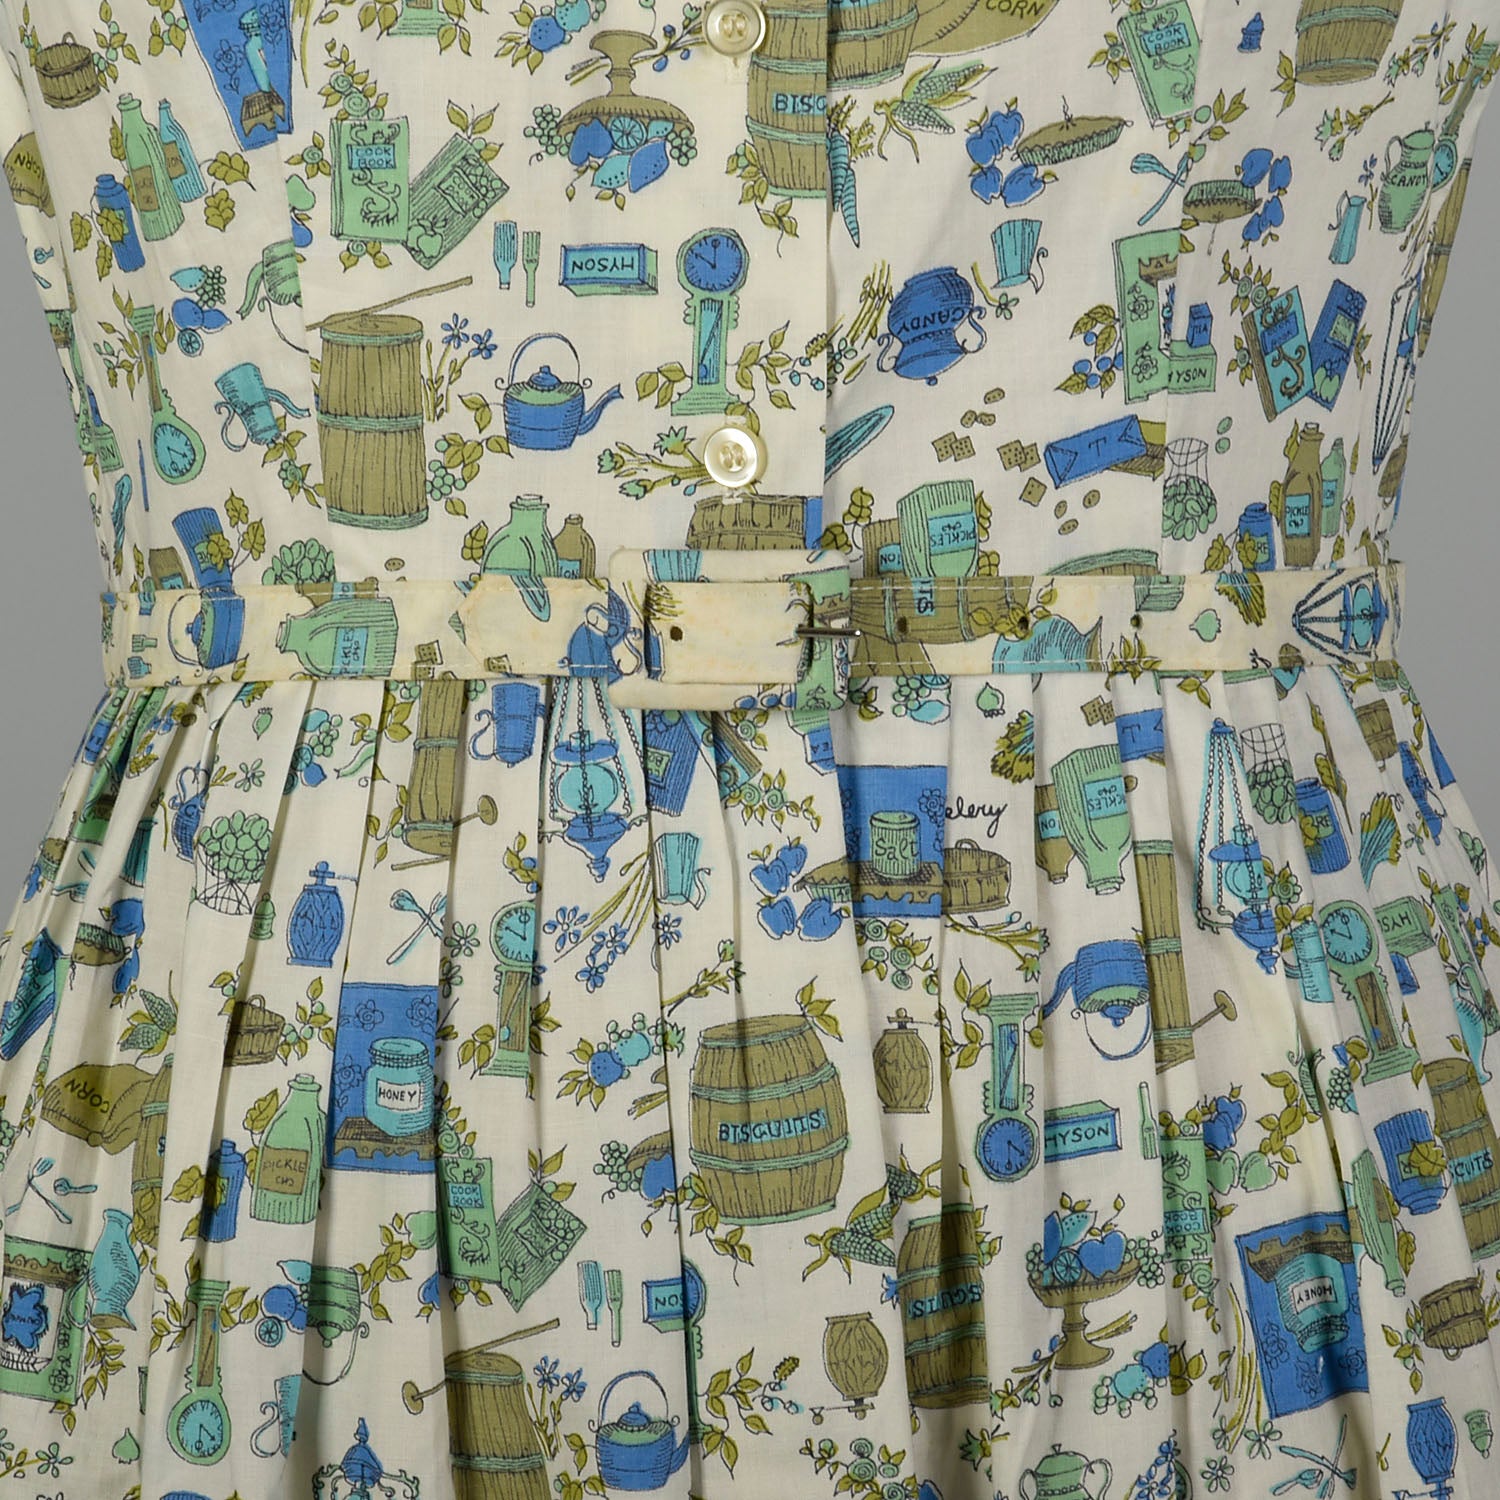 Large 1950s Day Dress Cotton Novelty Kitchen Cooking Print Short Sleeve Summer